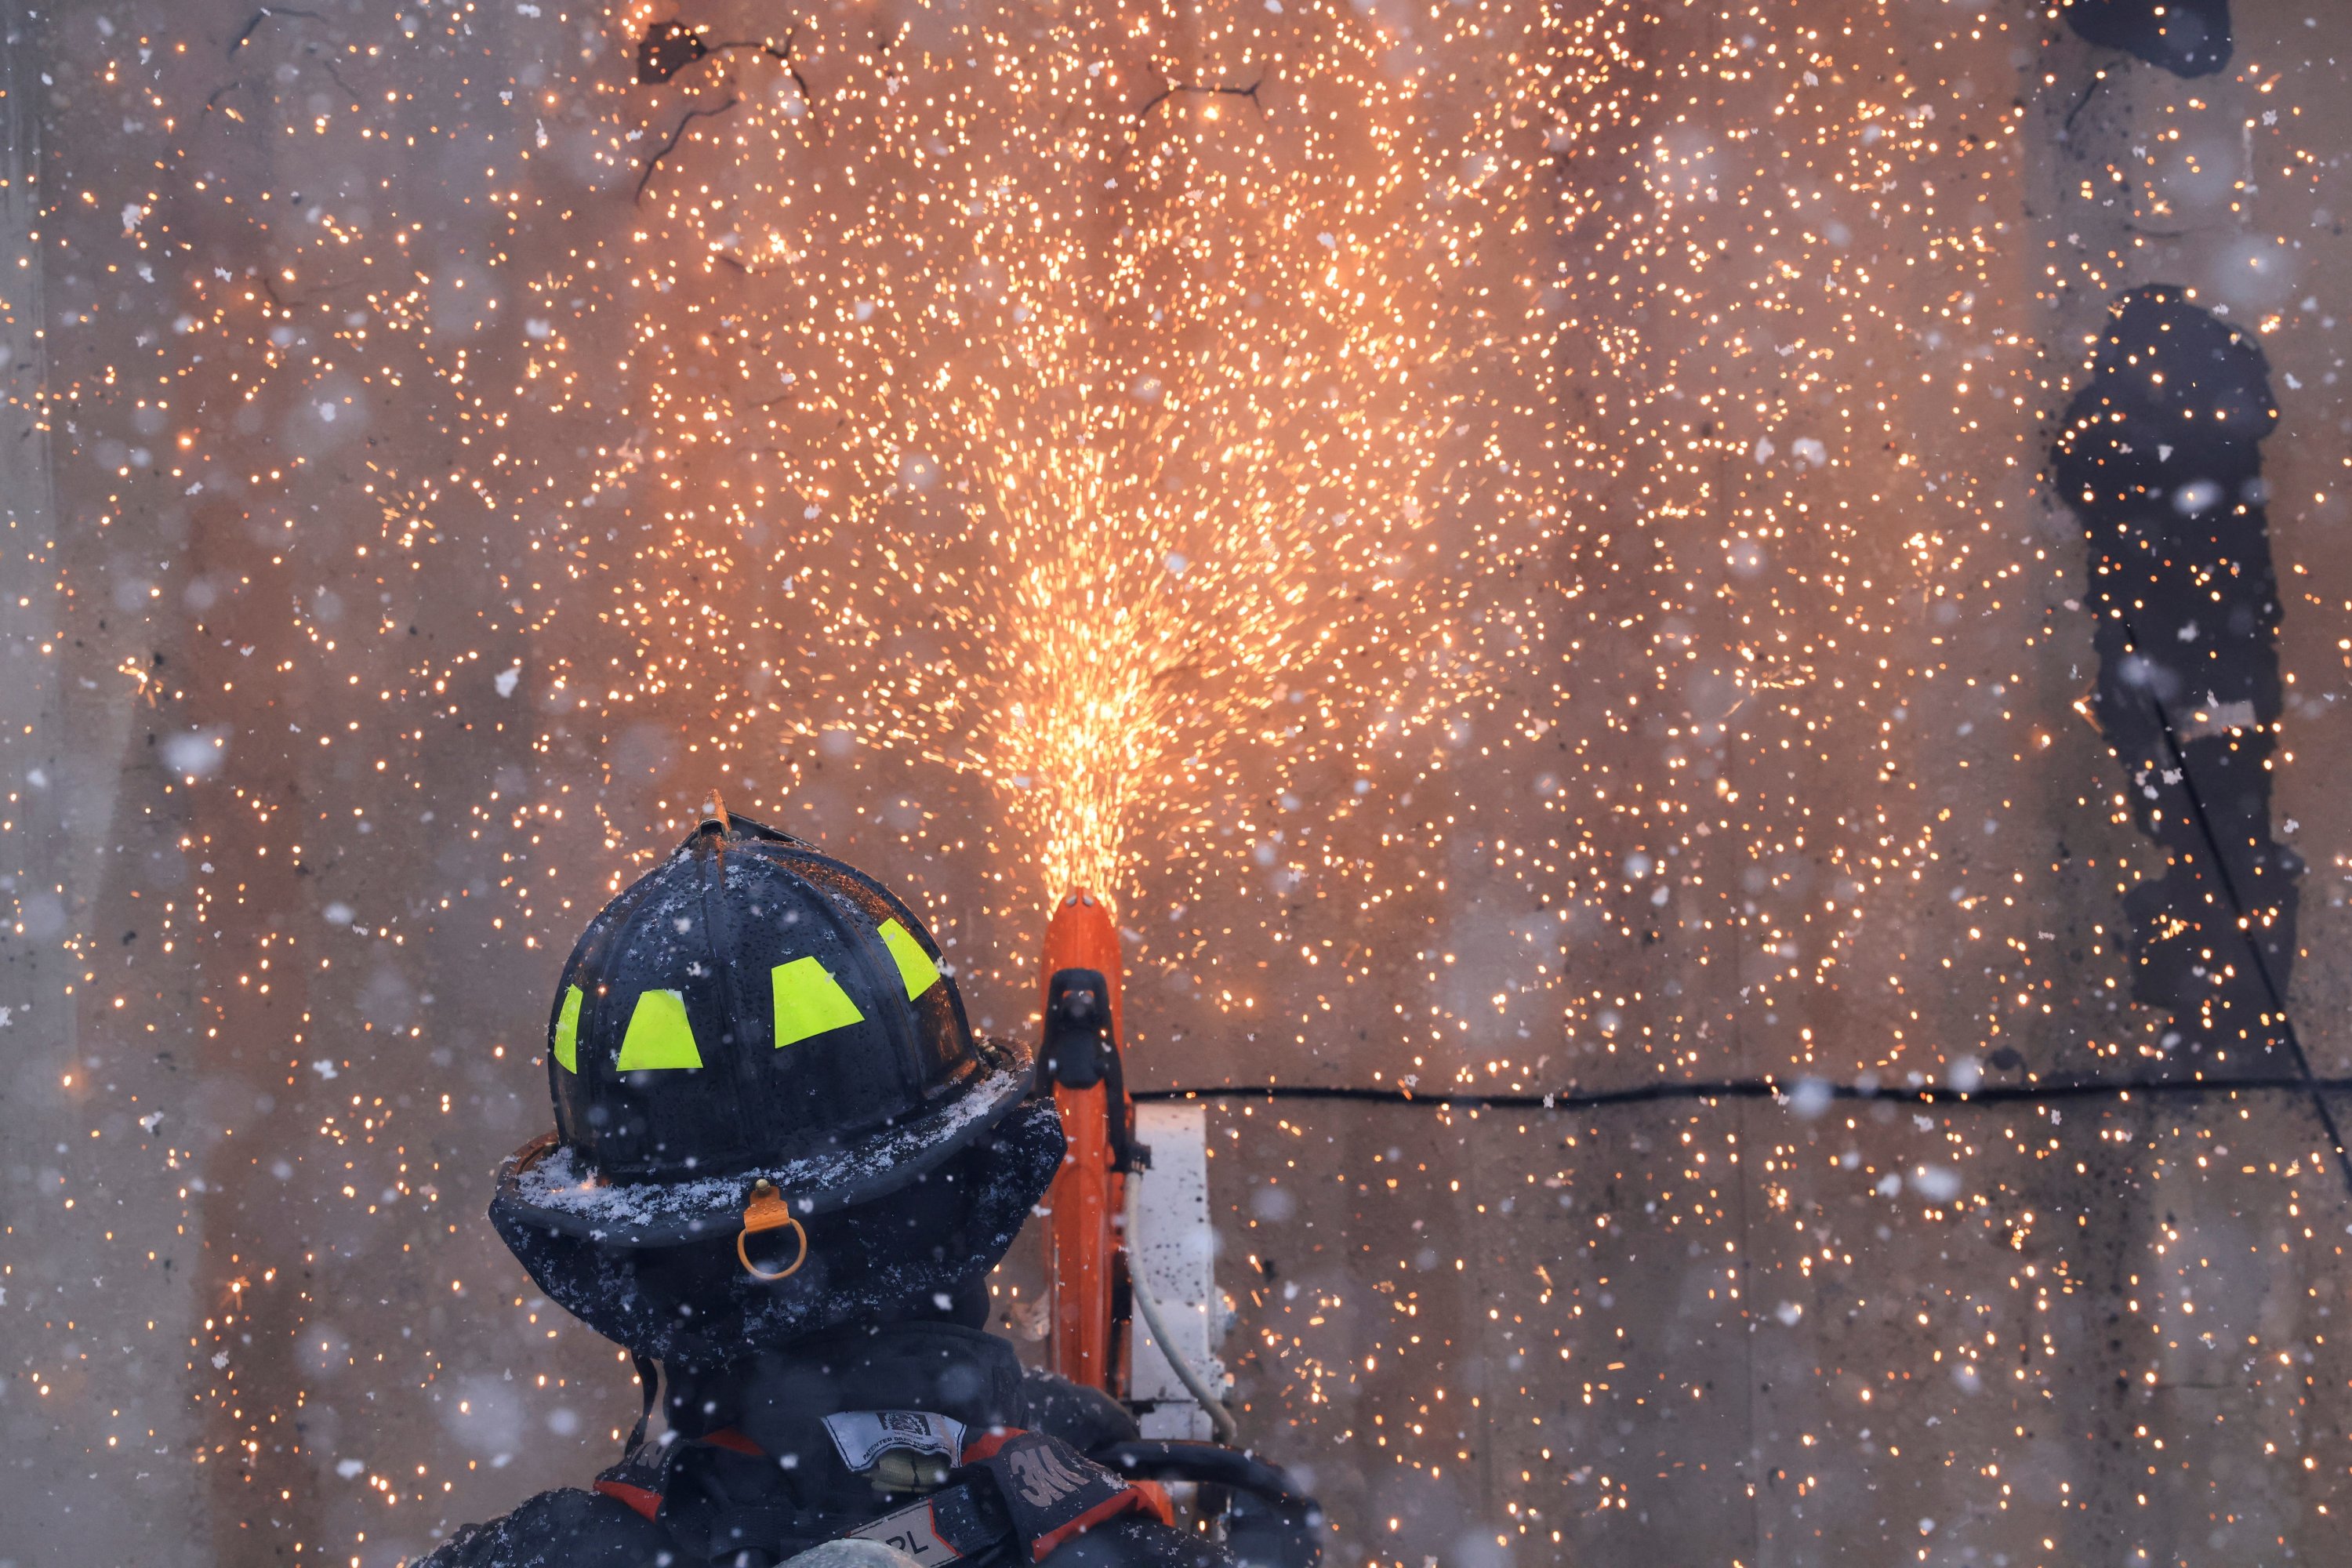 A firefighter cuts holes into a burning shipping container to spray water inside from different angles, a day after evacuation orders, in Louisville, Colorado, U.S., Dec. 31, 2021. (Reuters Photo)